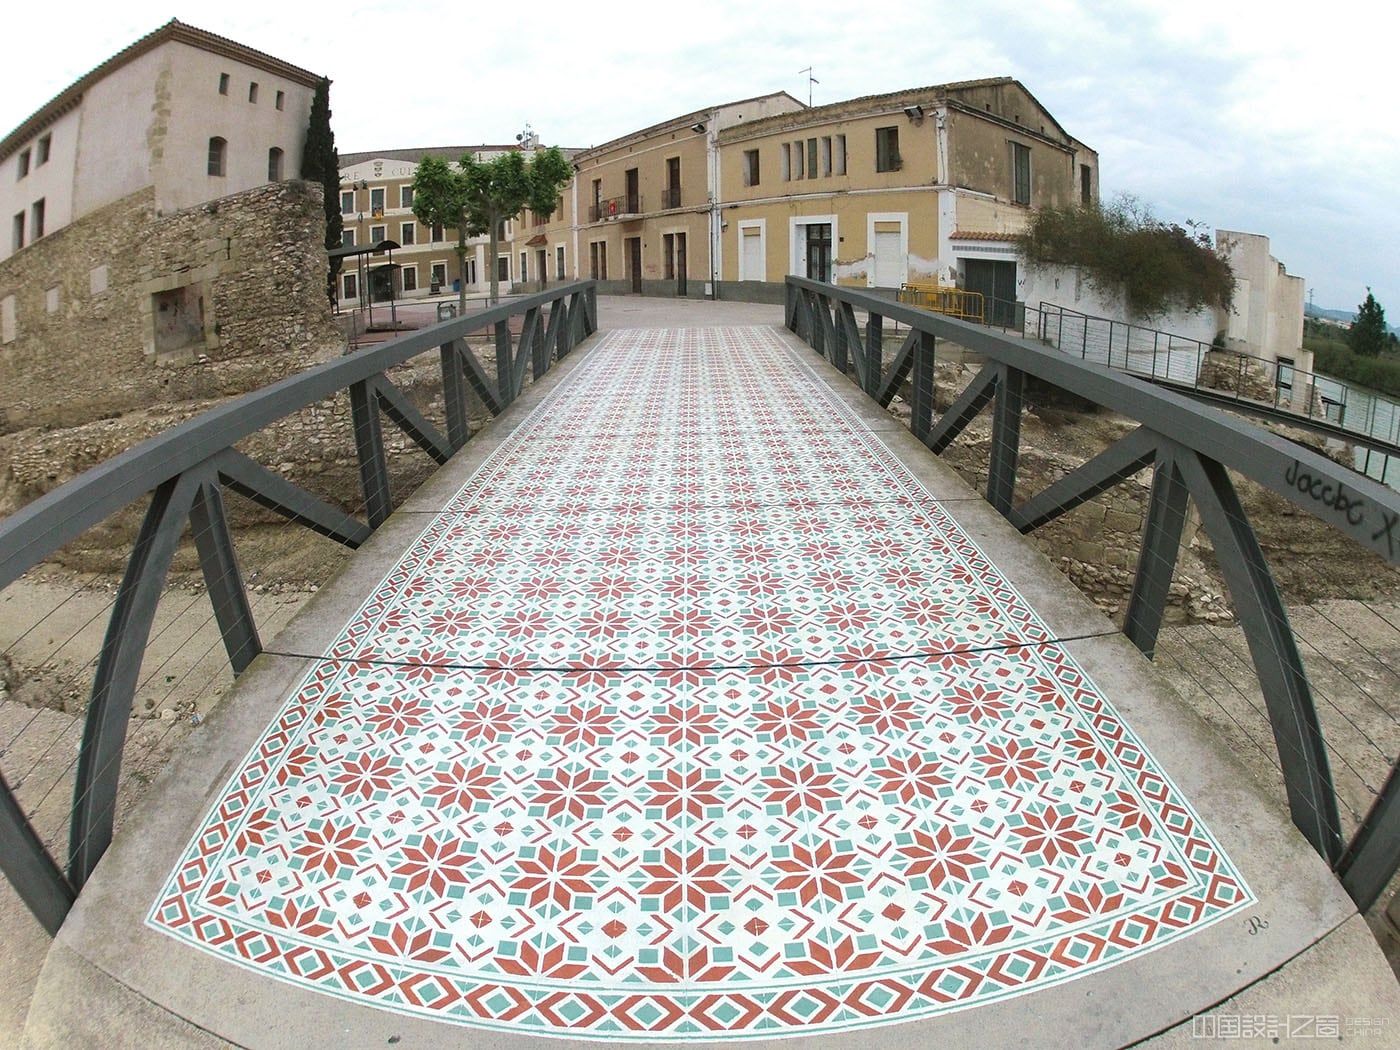 A photo of a vibrant patterned rug-like intervention painted on the co<em></em>ncrete in a city